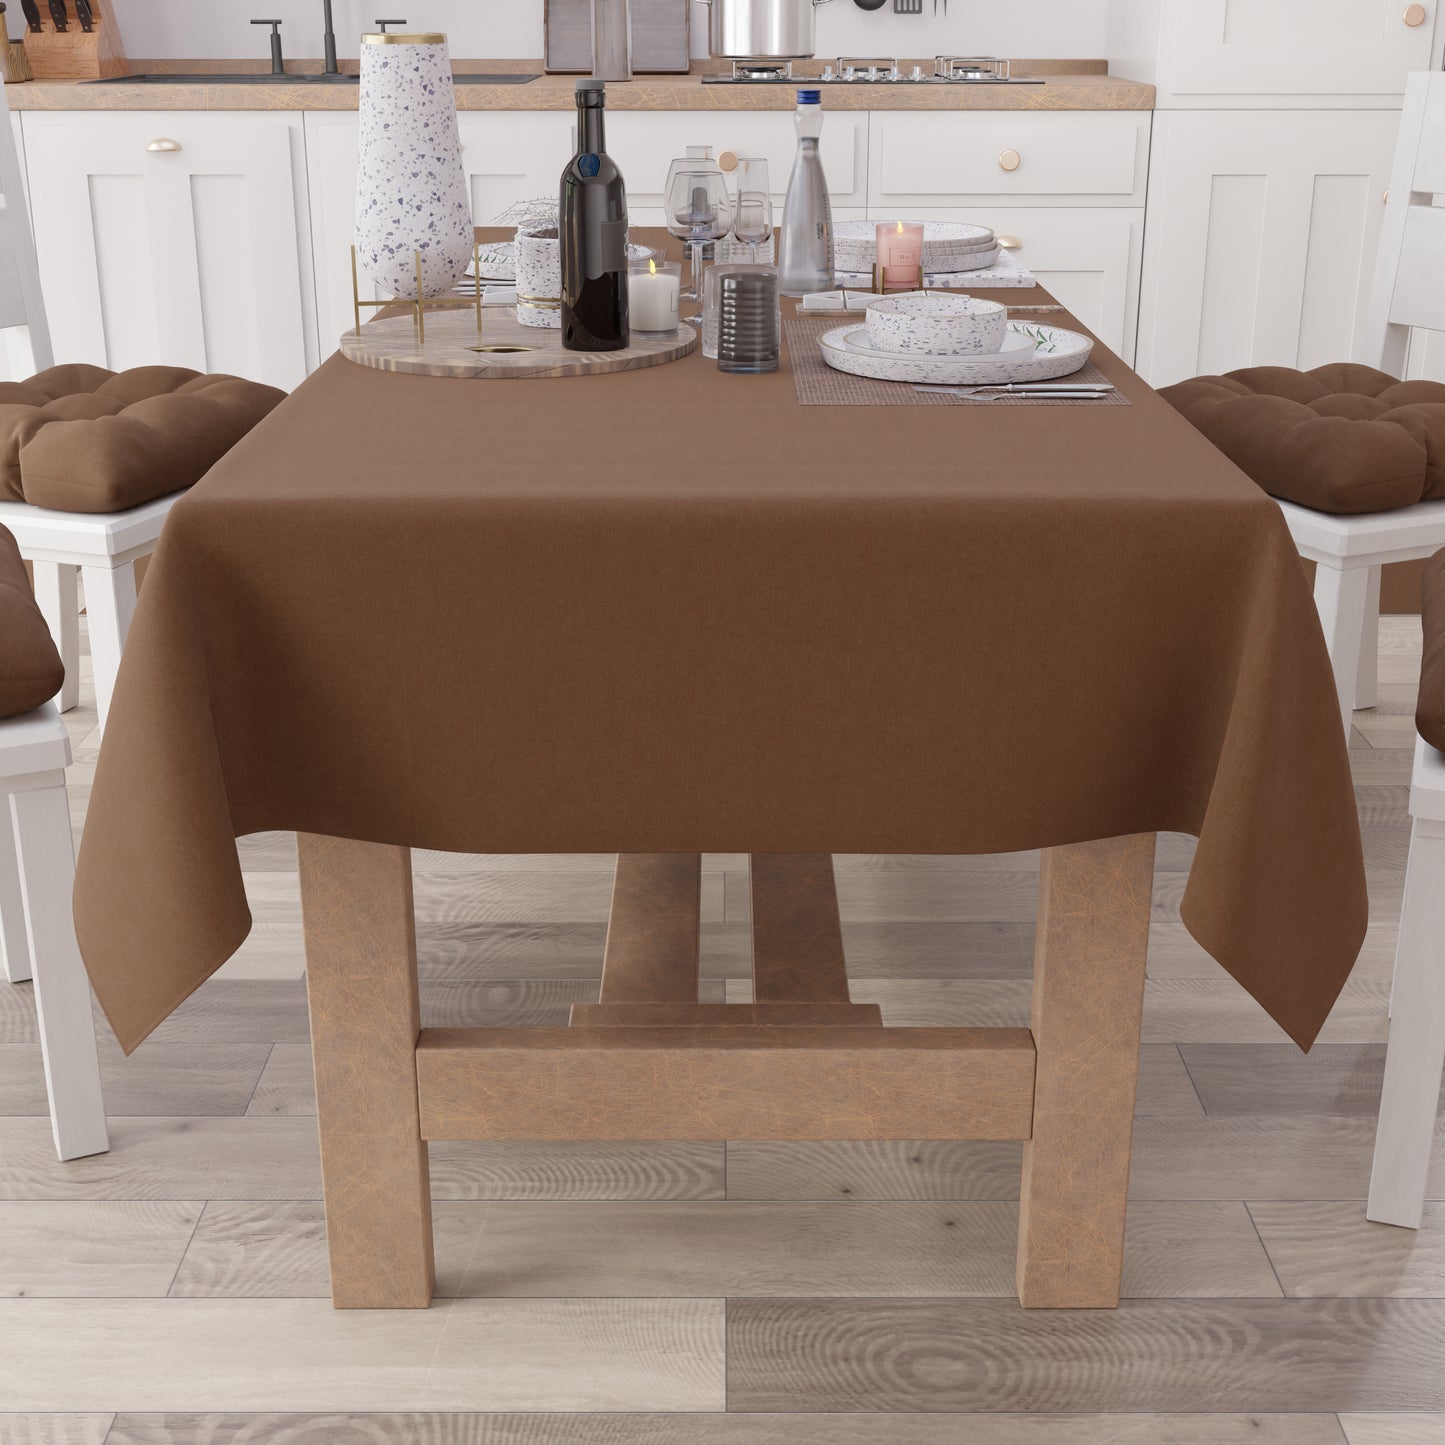 Tablecloth in Cotton, Plain Brown Tablecloth